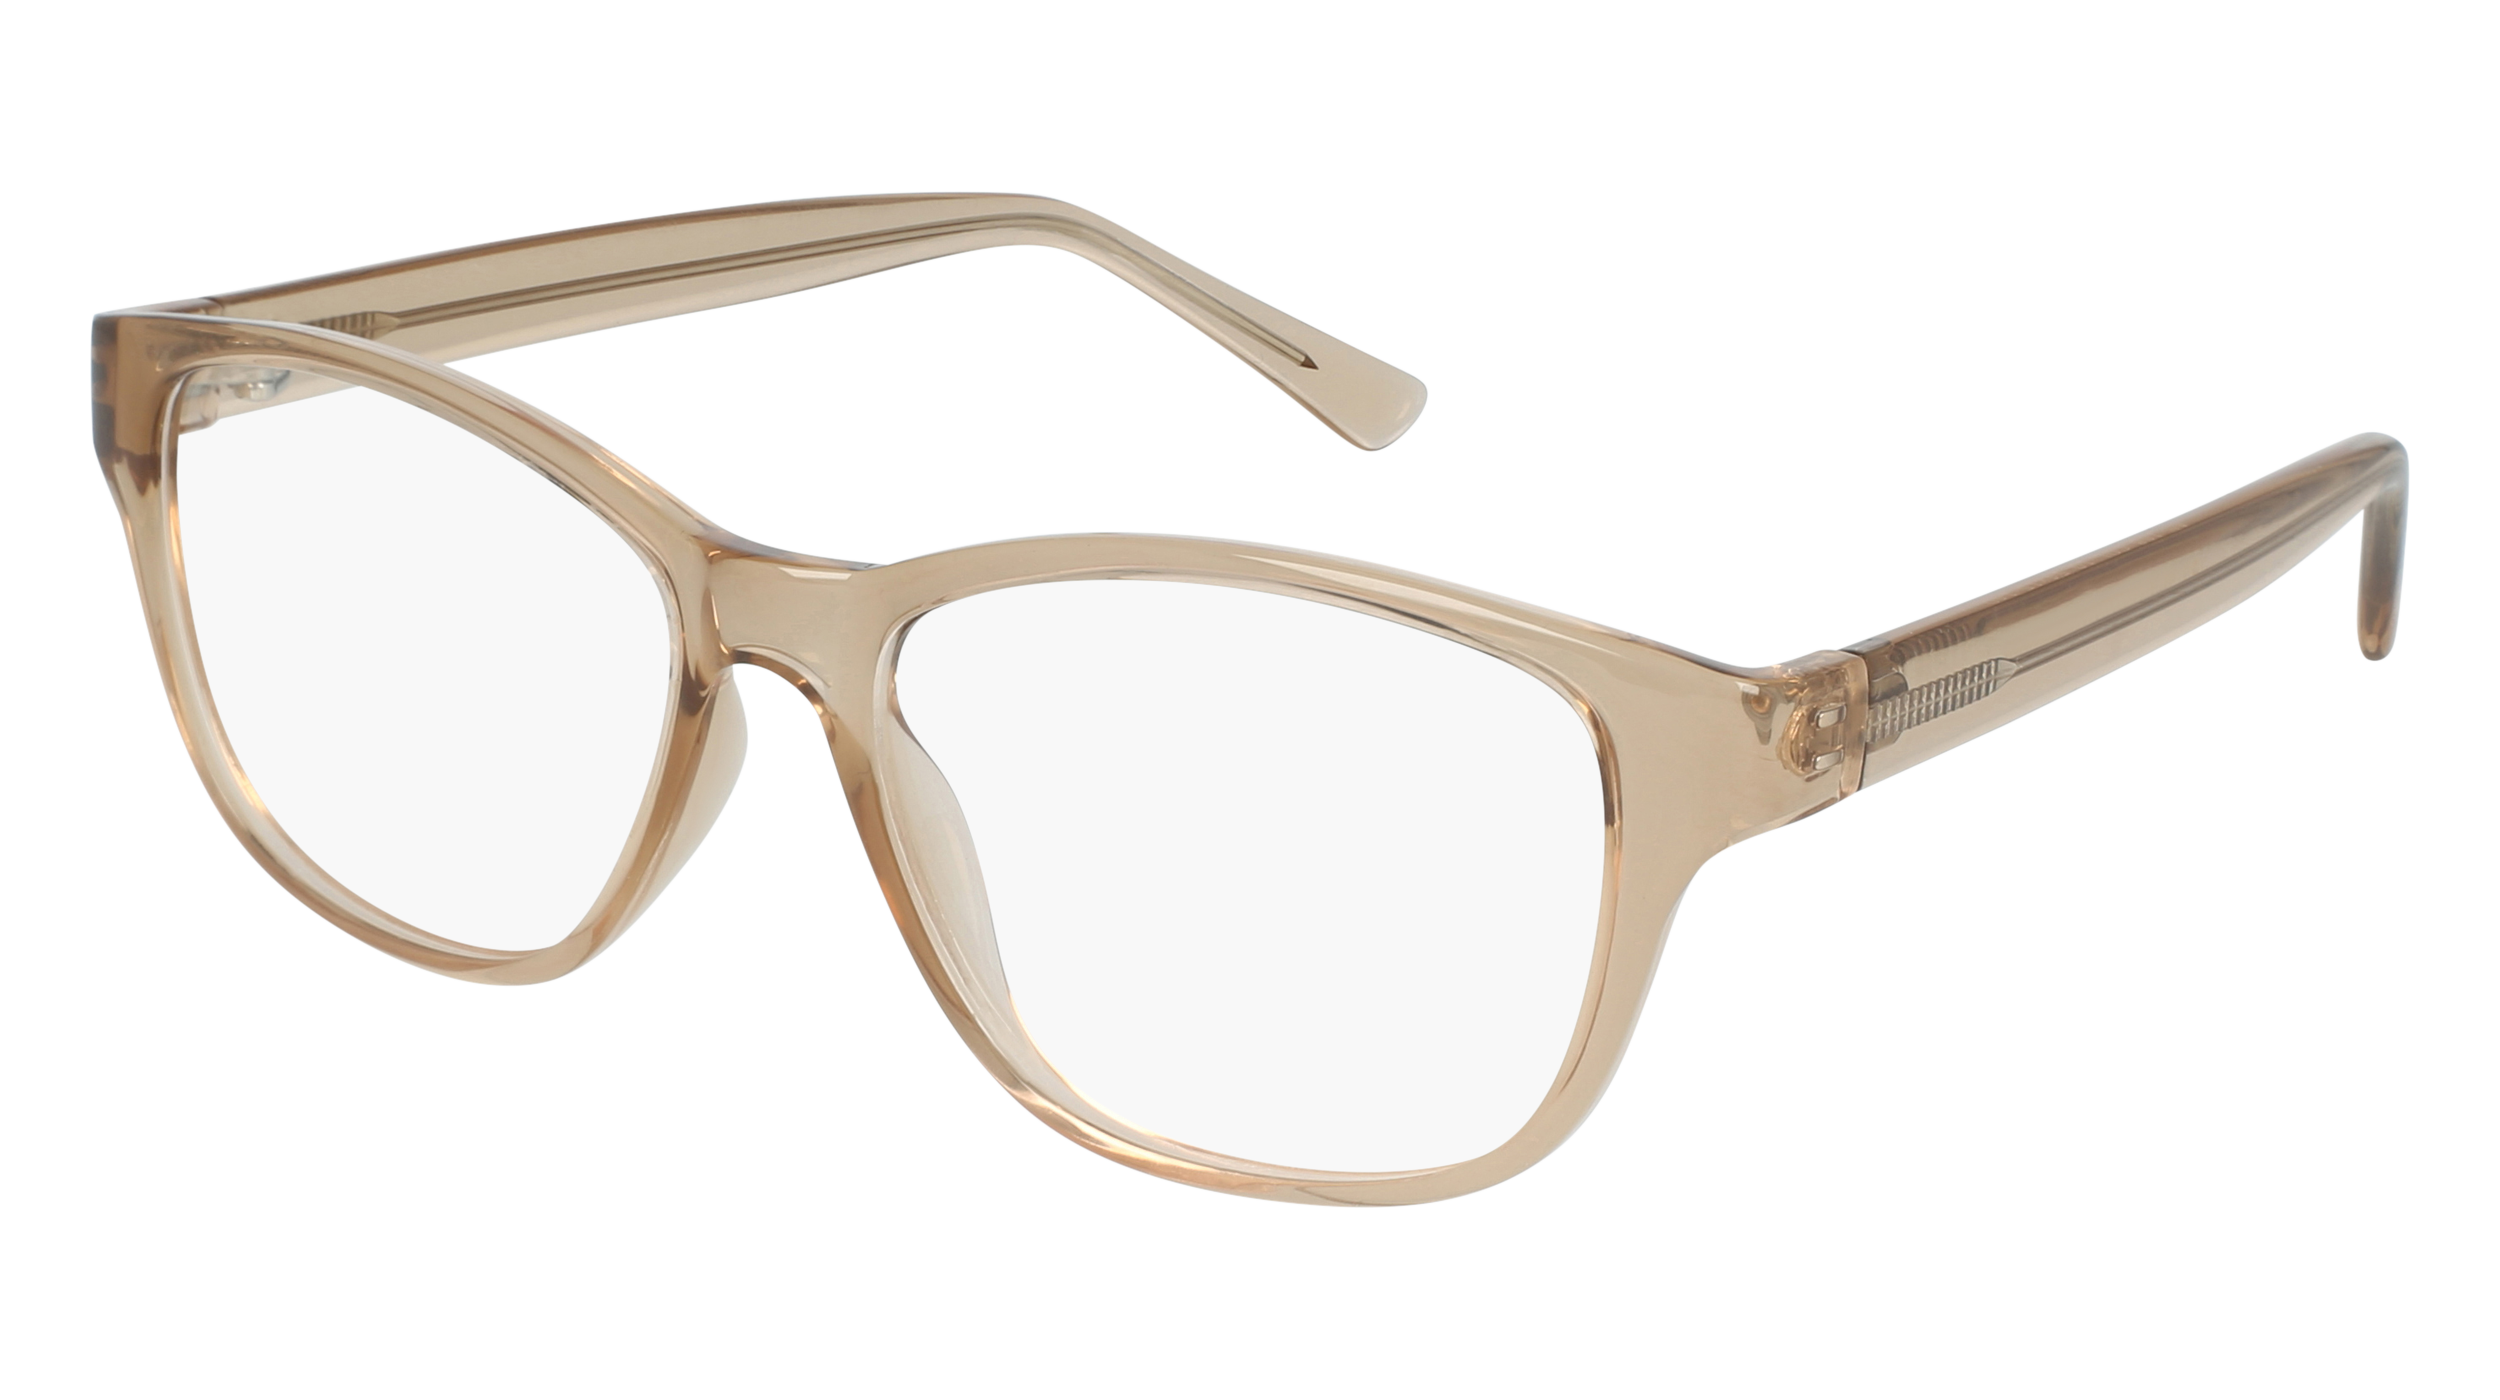 a AN 188 women's eyeglasses (from the side)